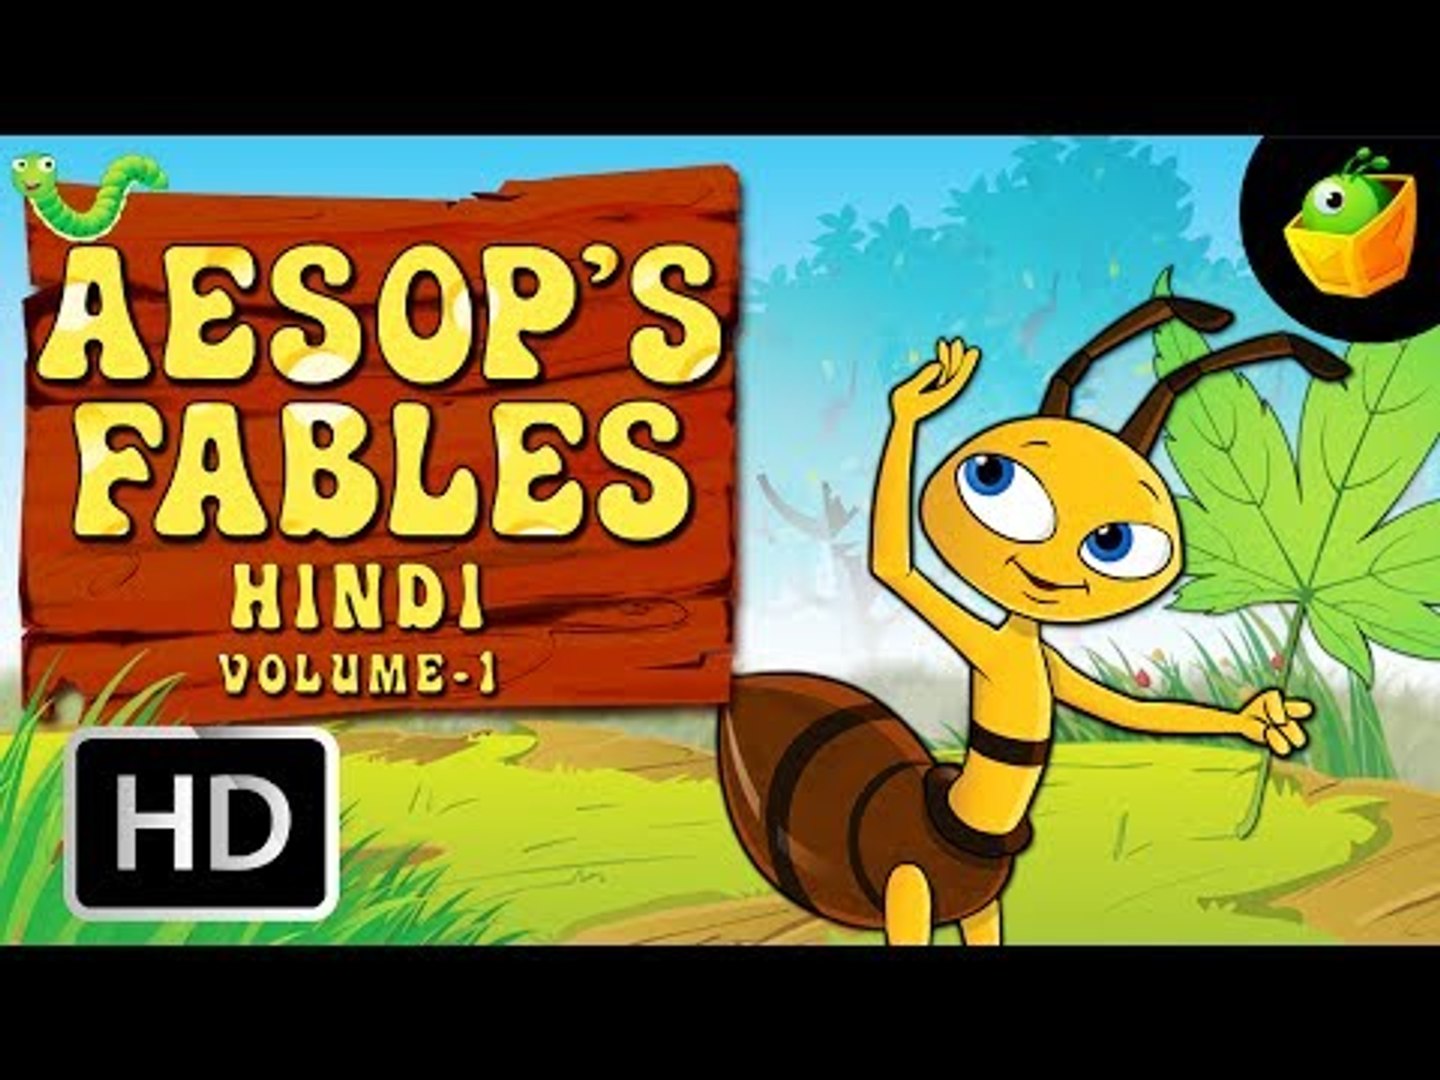 Aesop's Fables Full Stories Vol 1 In Hindi (HD) - Compilation of Cartoon/Animated  Stories For Kids - video Dailymotion